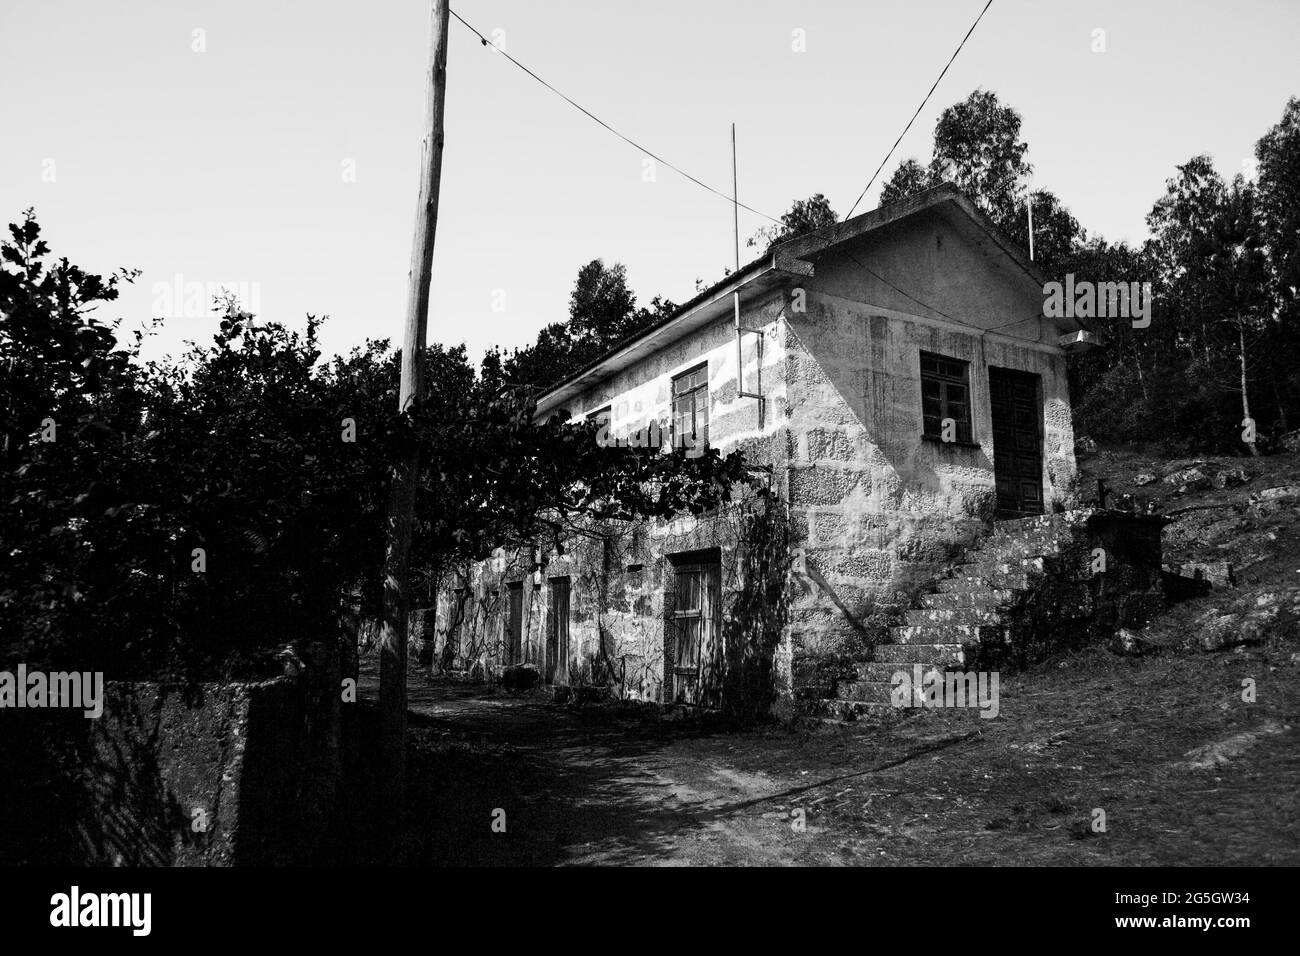 A typical rural house in the municipality of Arouca, Portugal. Black and white photo. Stock Photo